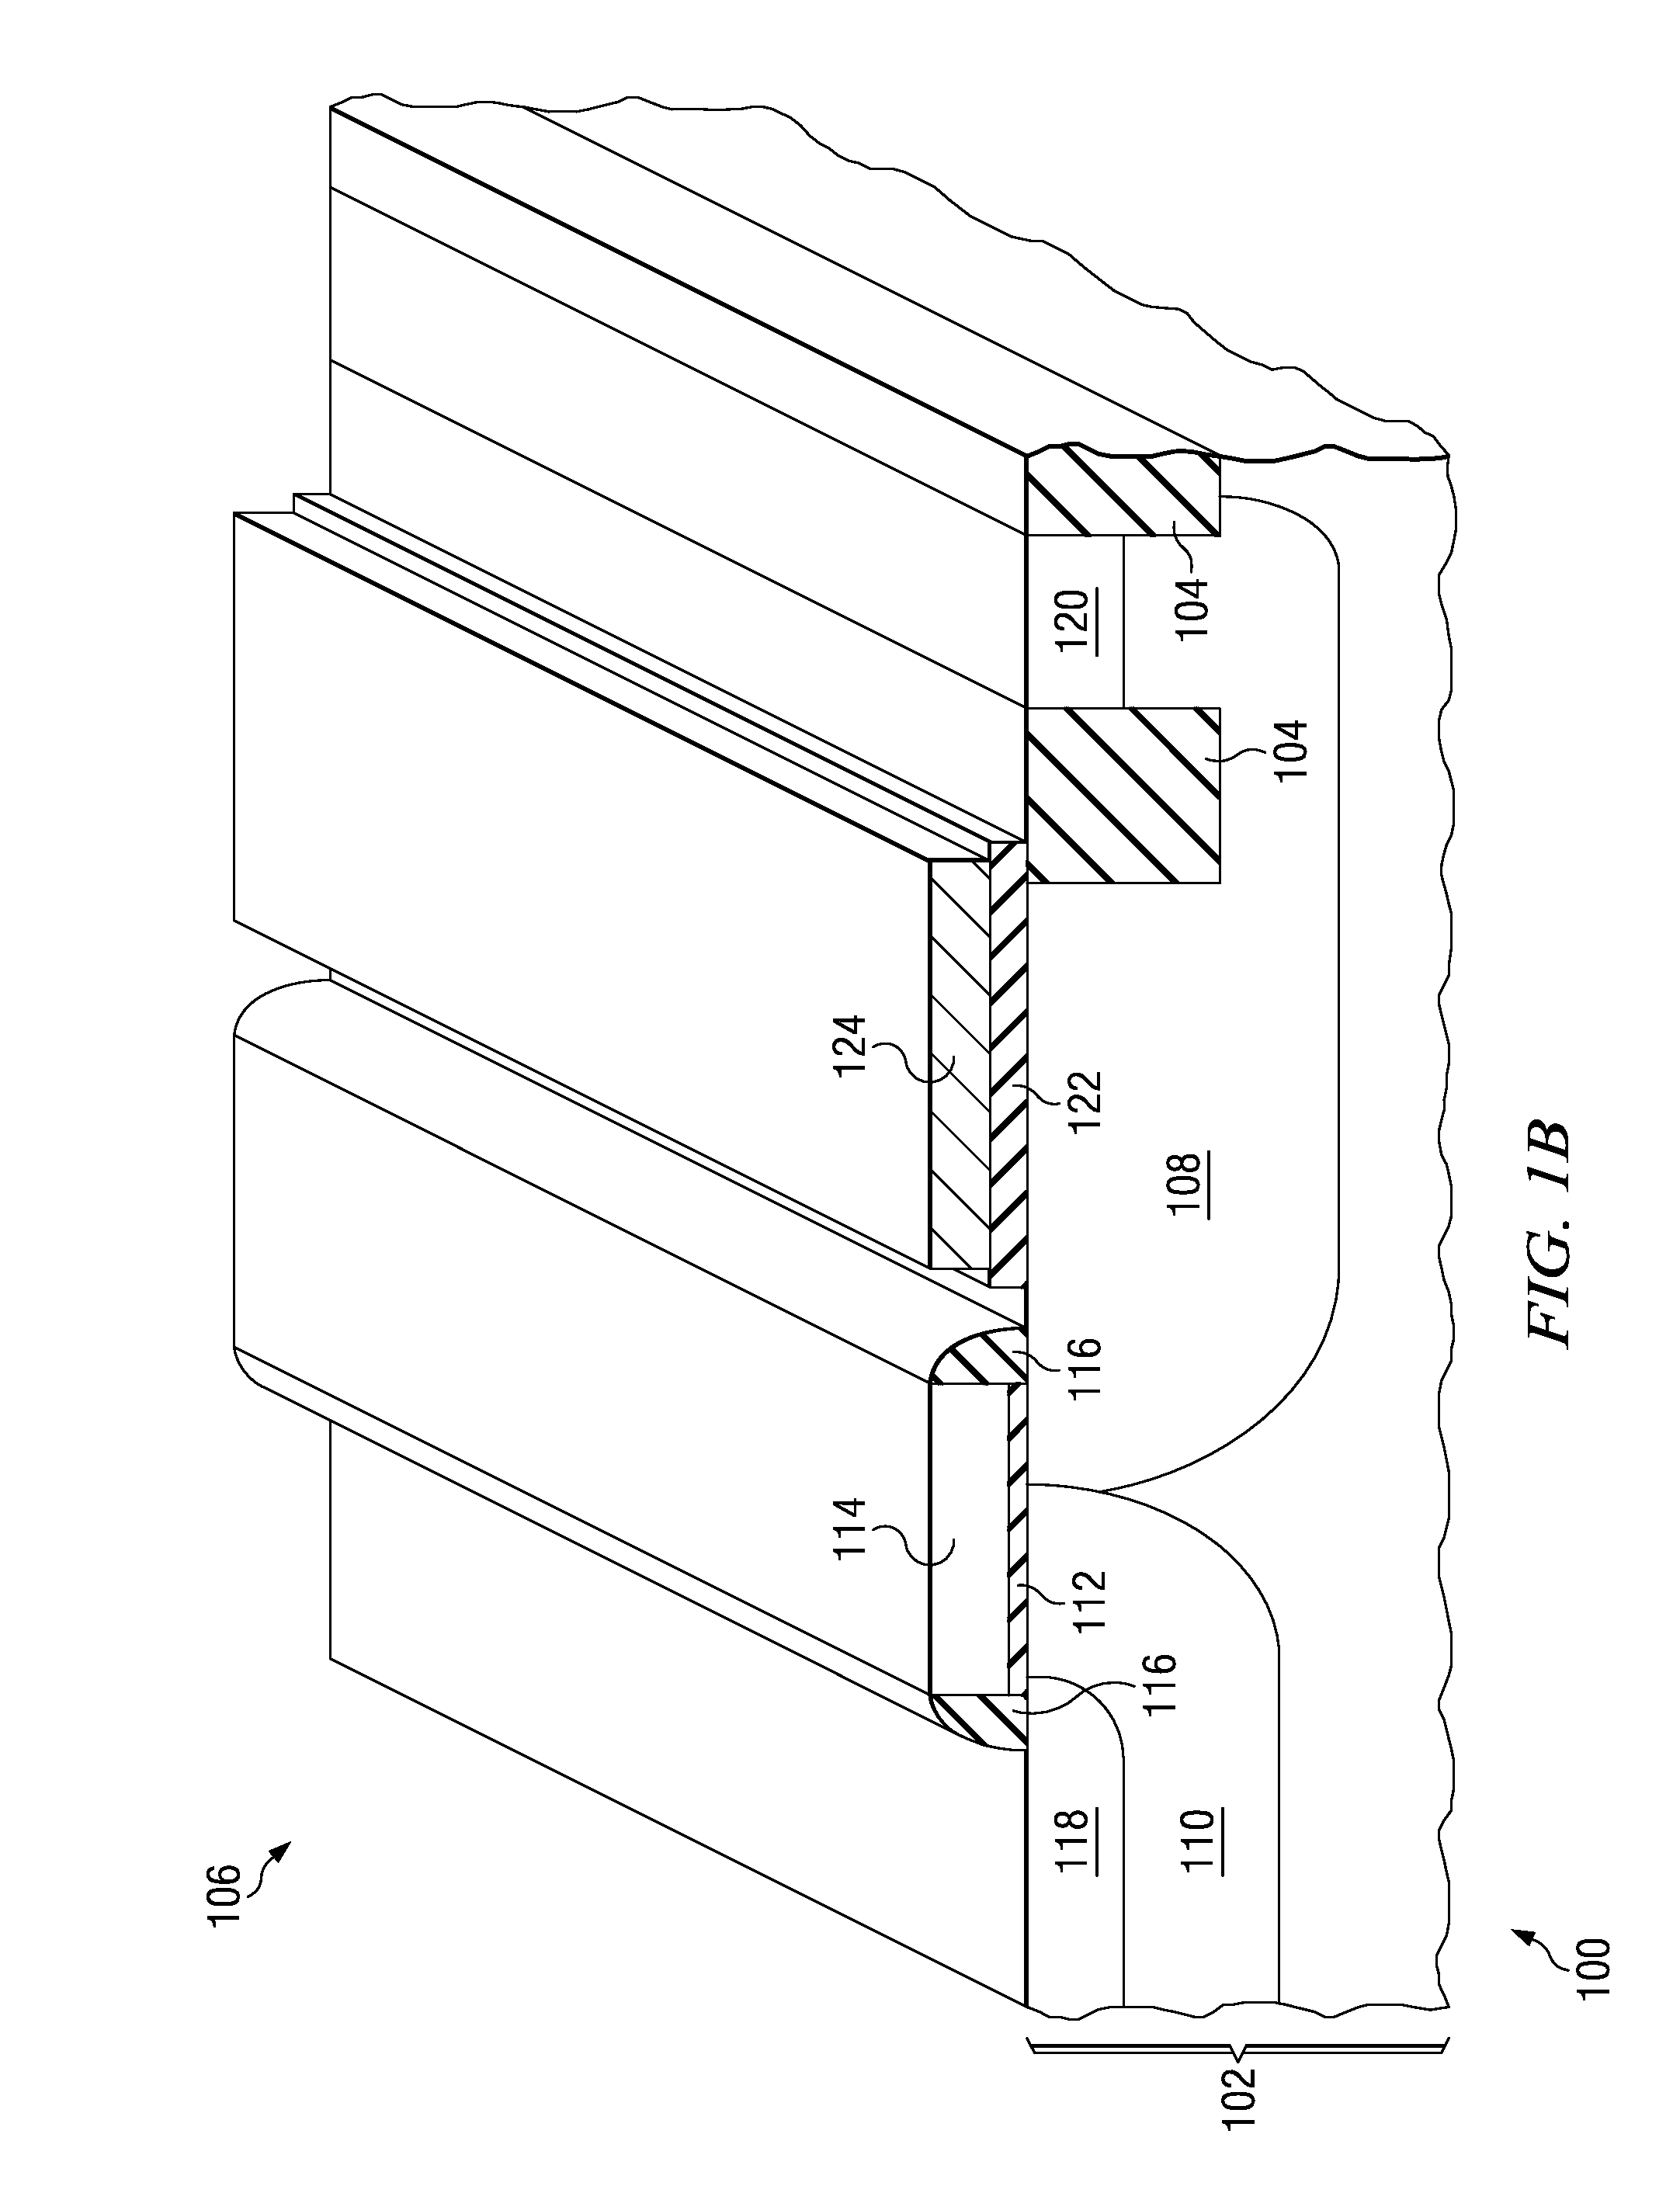 Monolithically integrated active snubber